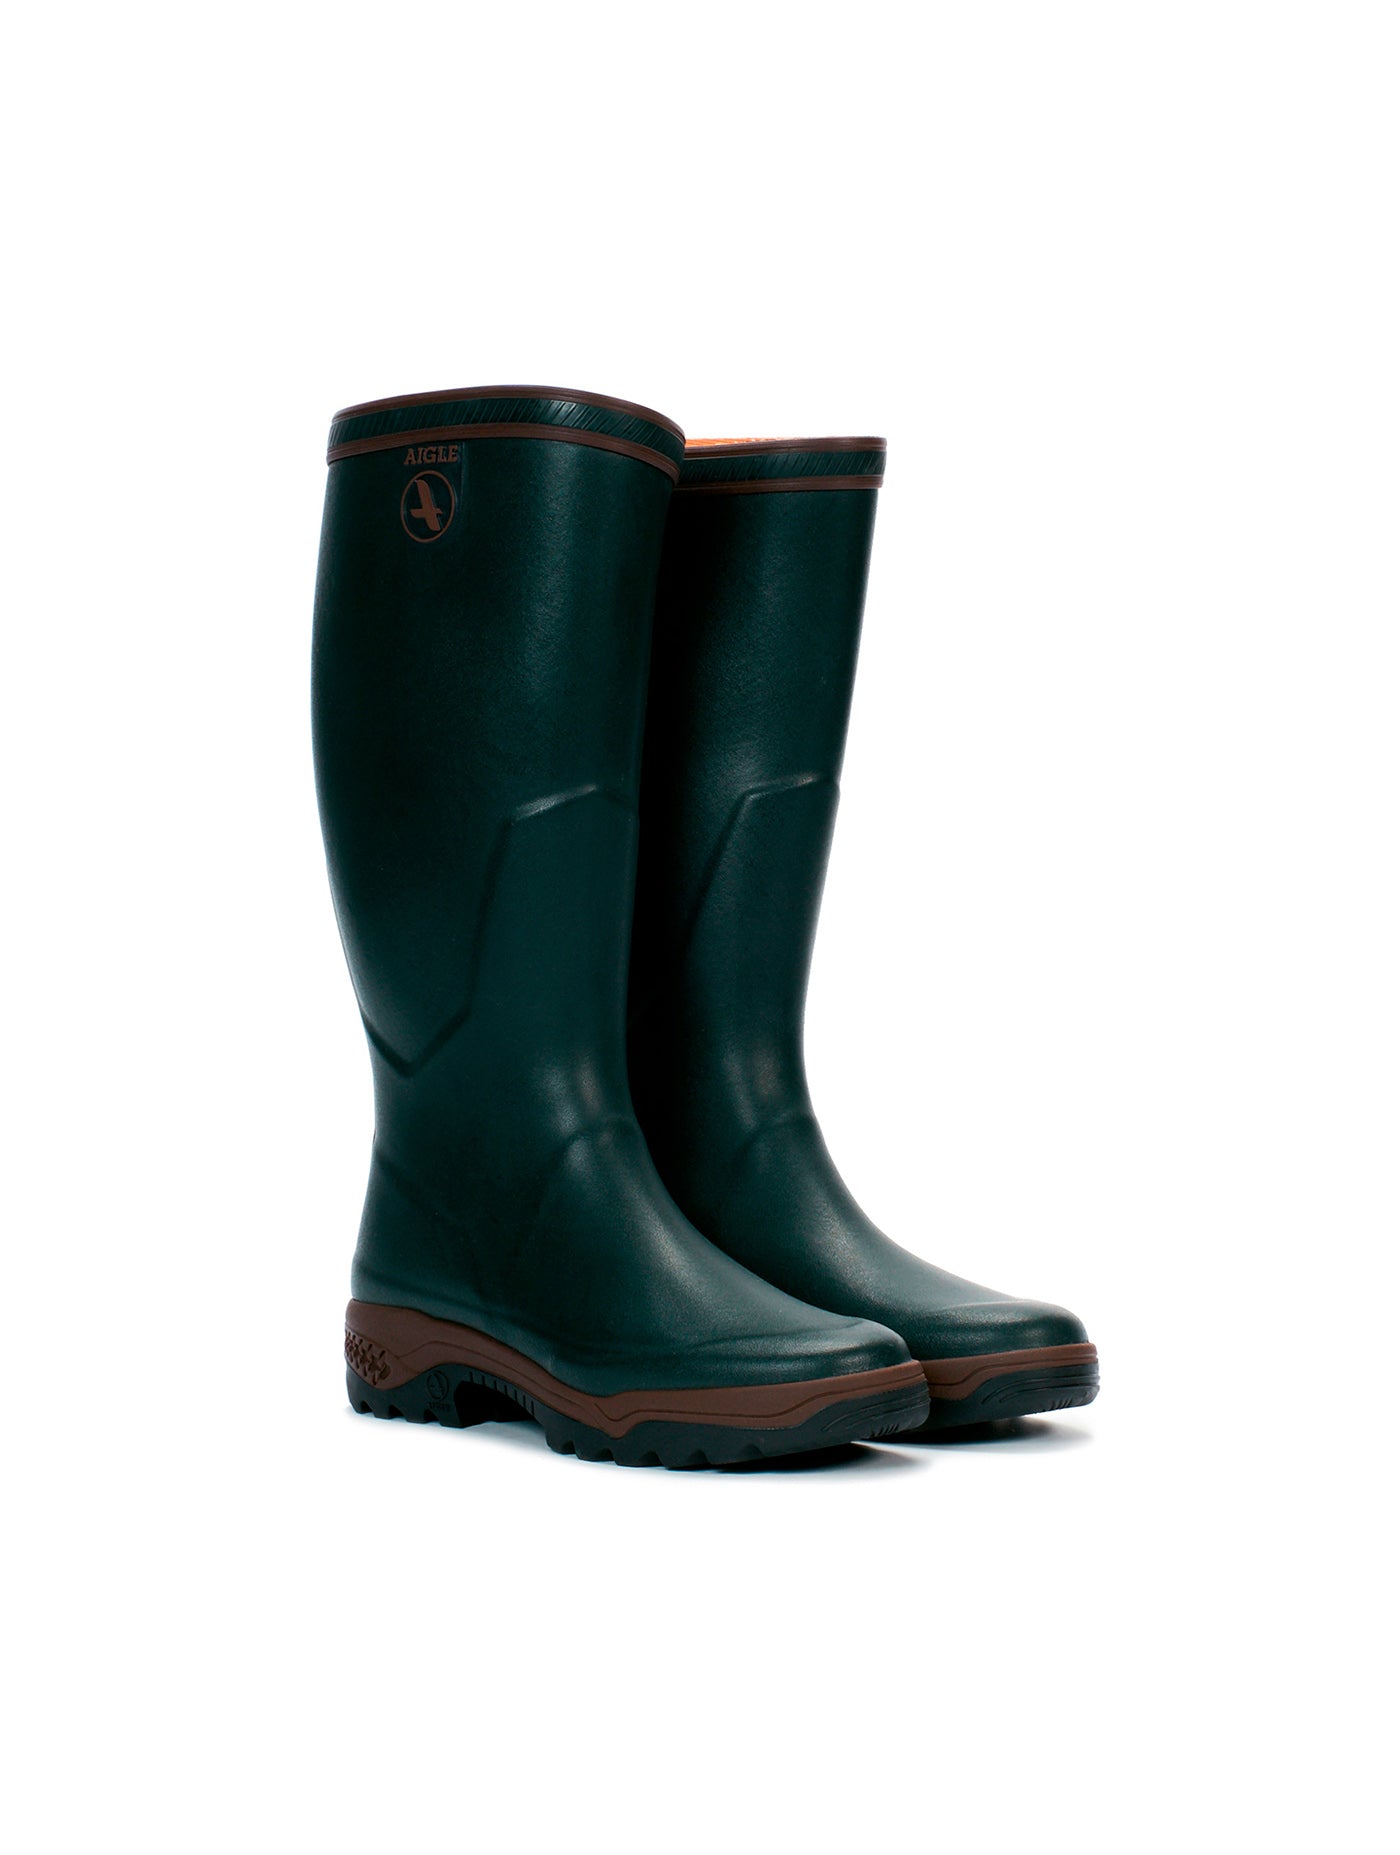 PARCOURS® 2 anti-fatigue Aigle hunting boots